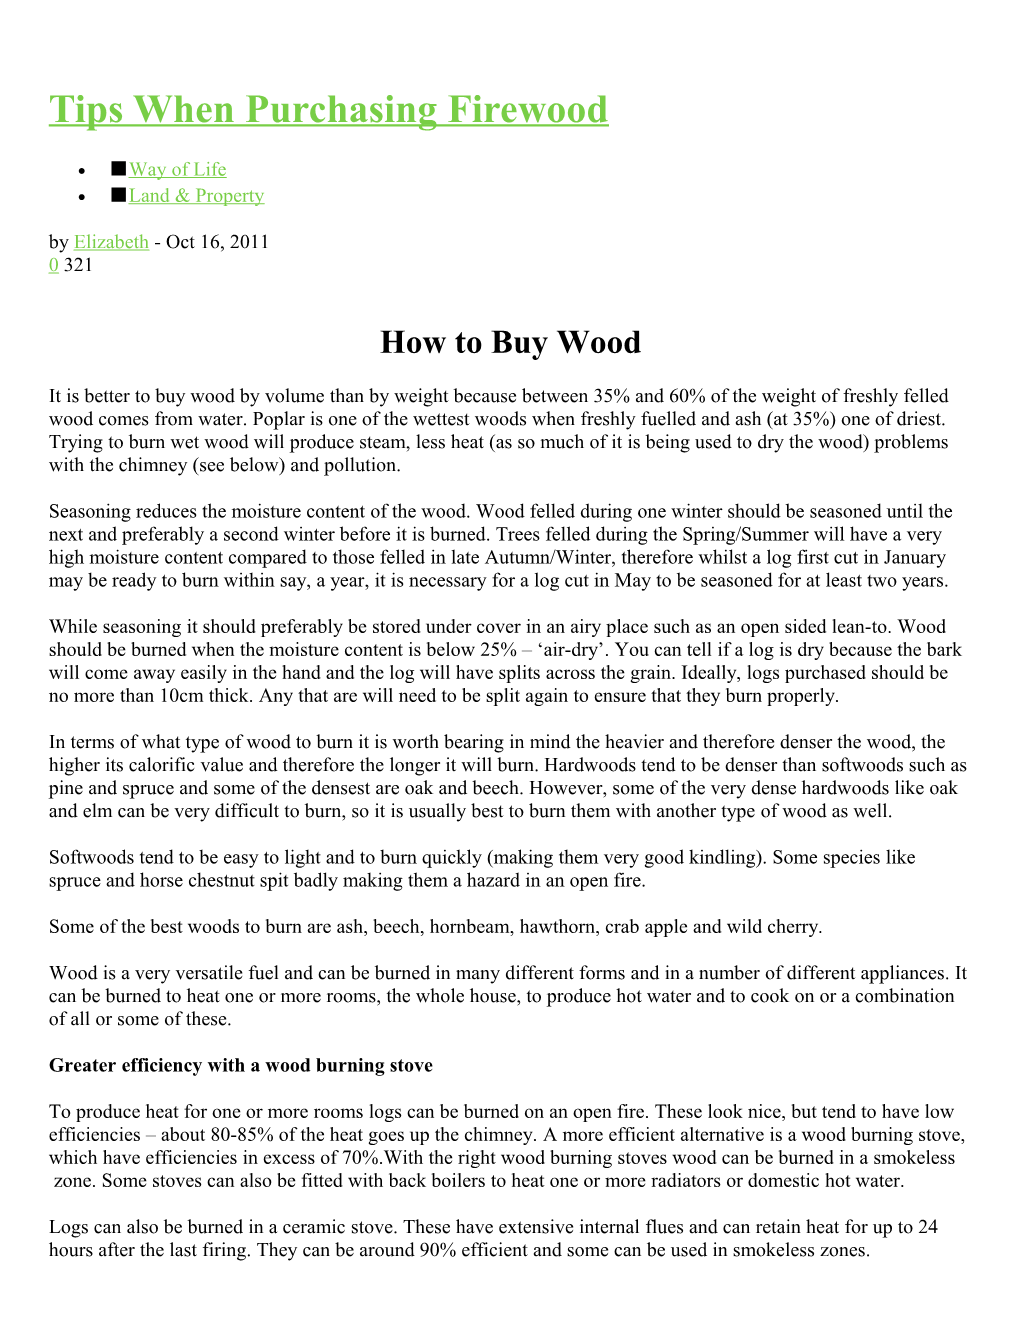 Tips When Purchasing Firewood